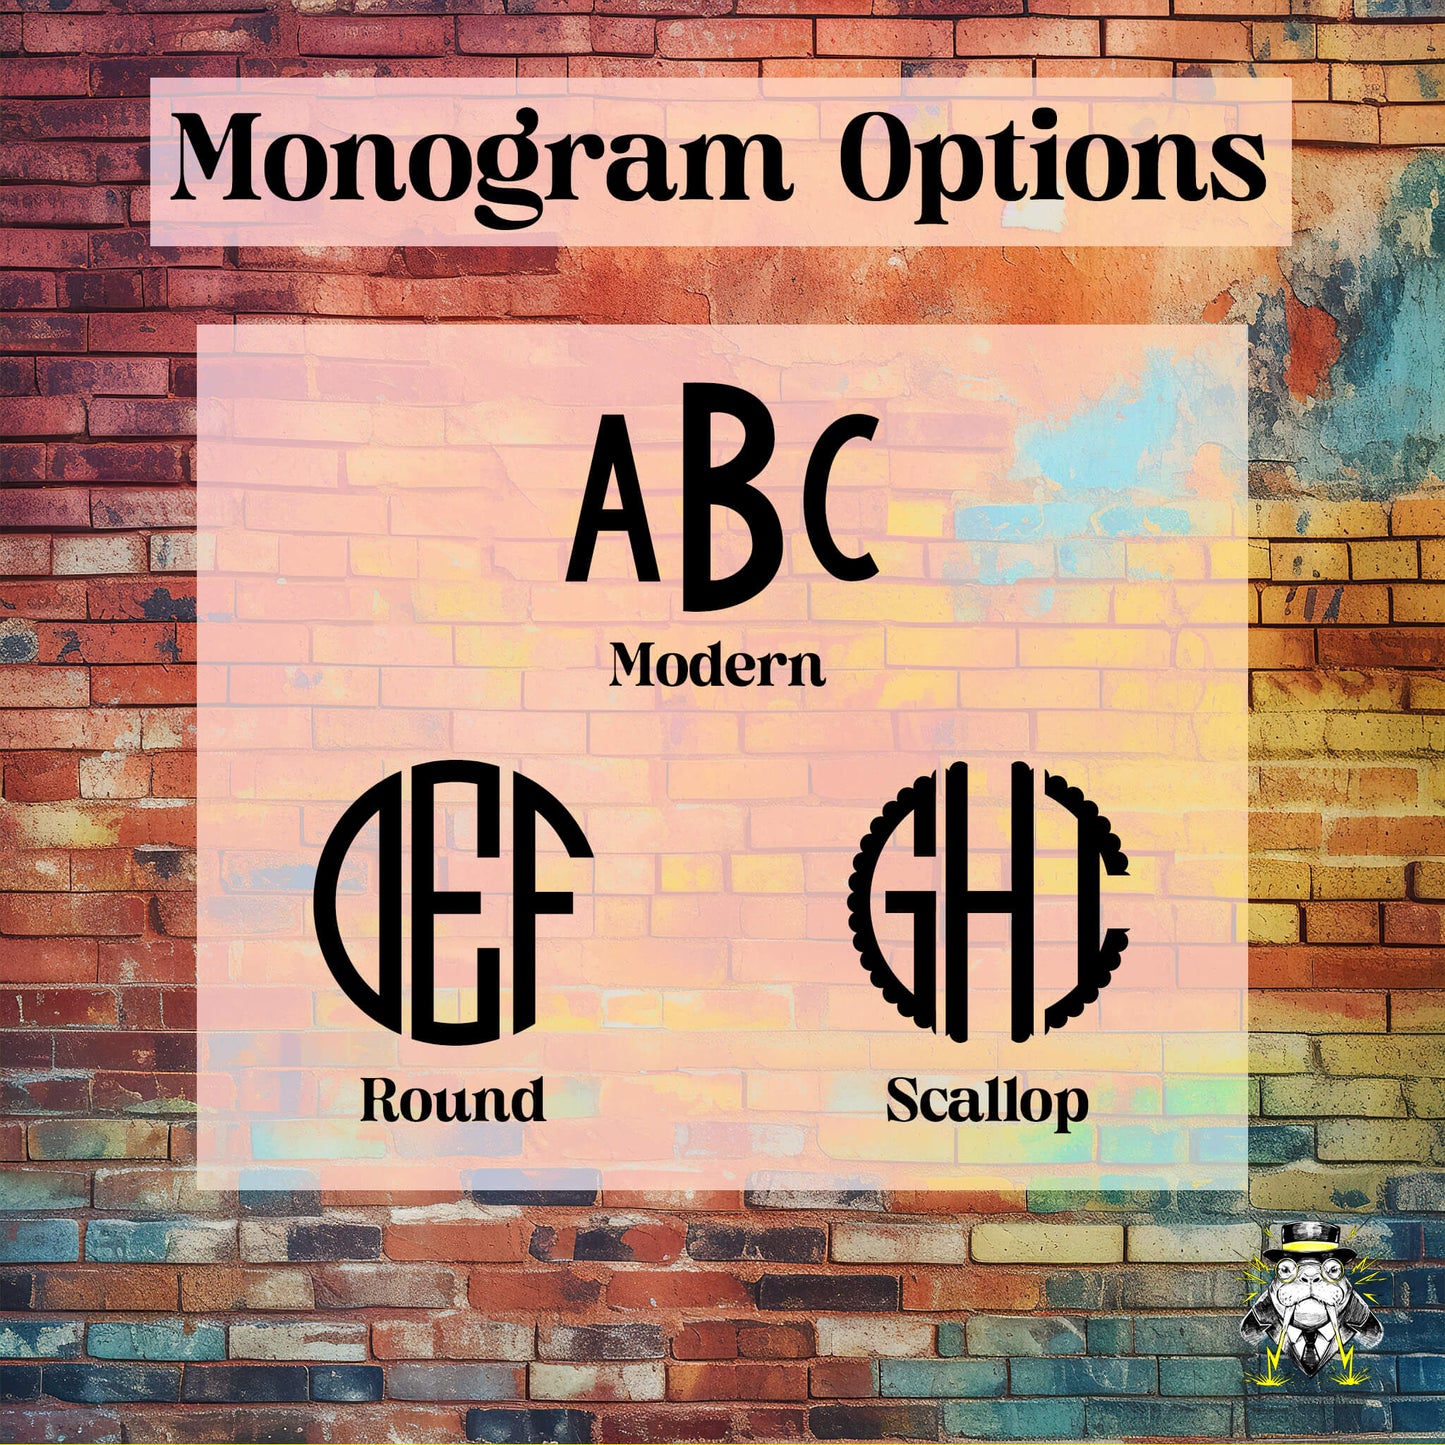 Monogram font options: modern, round, and scallop